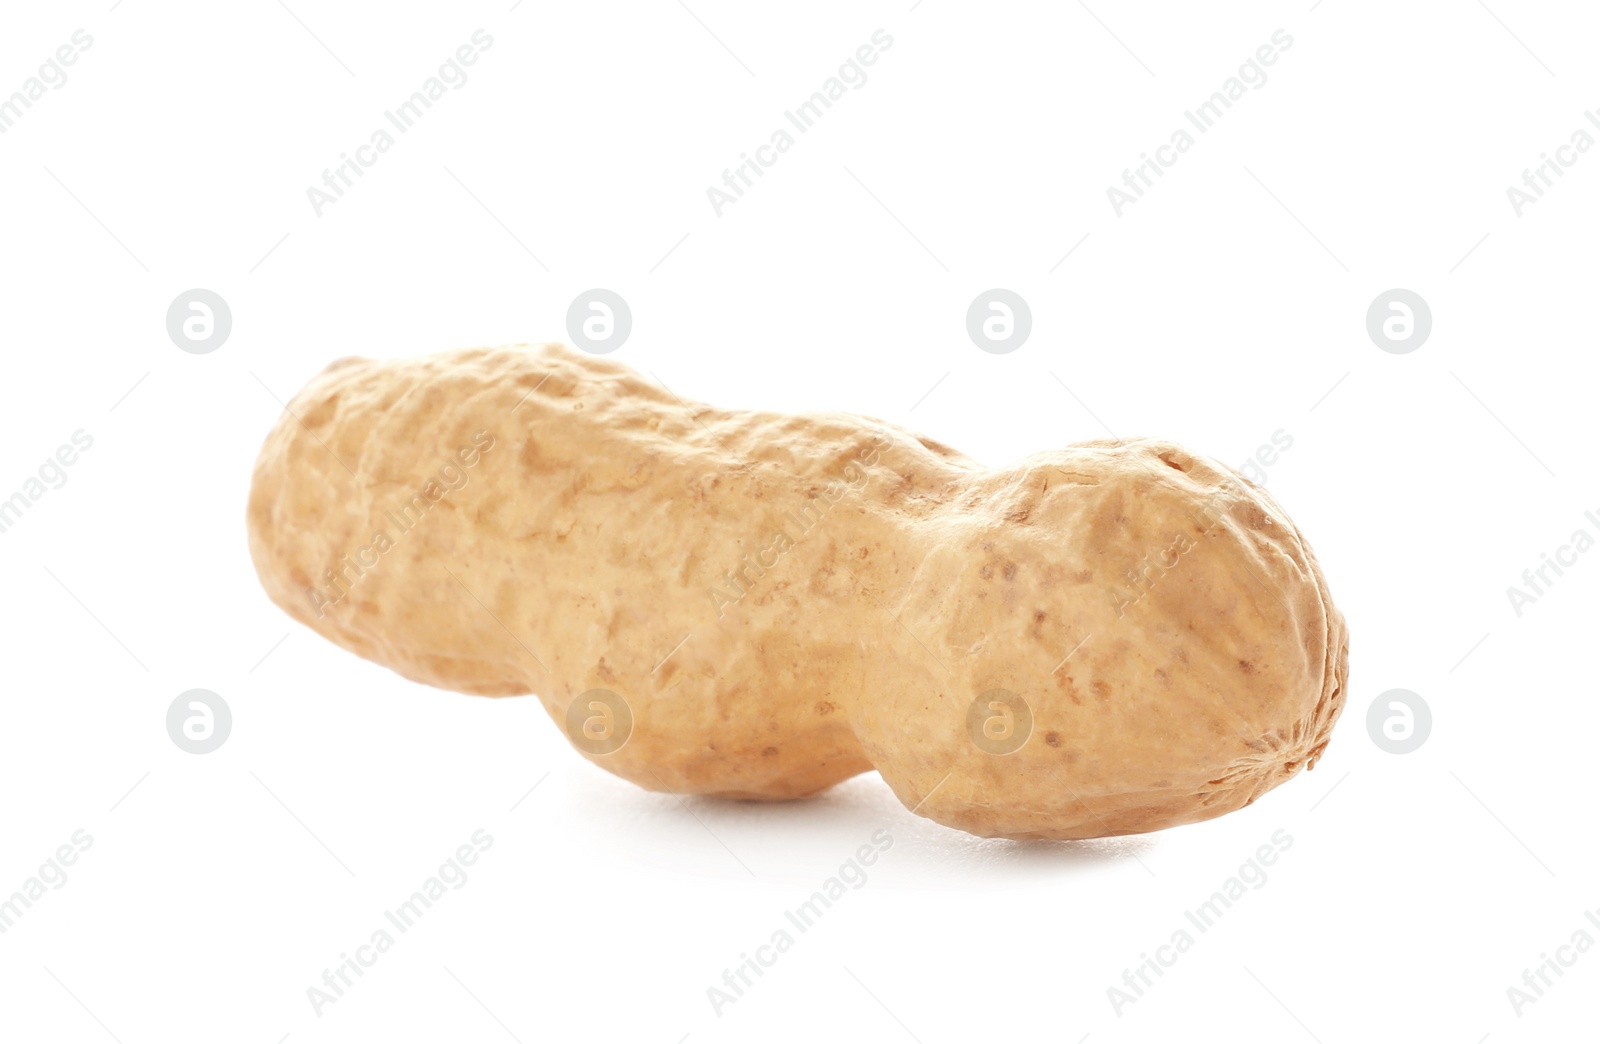 Photo of Raw peanuts in pod on white background